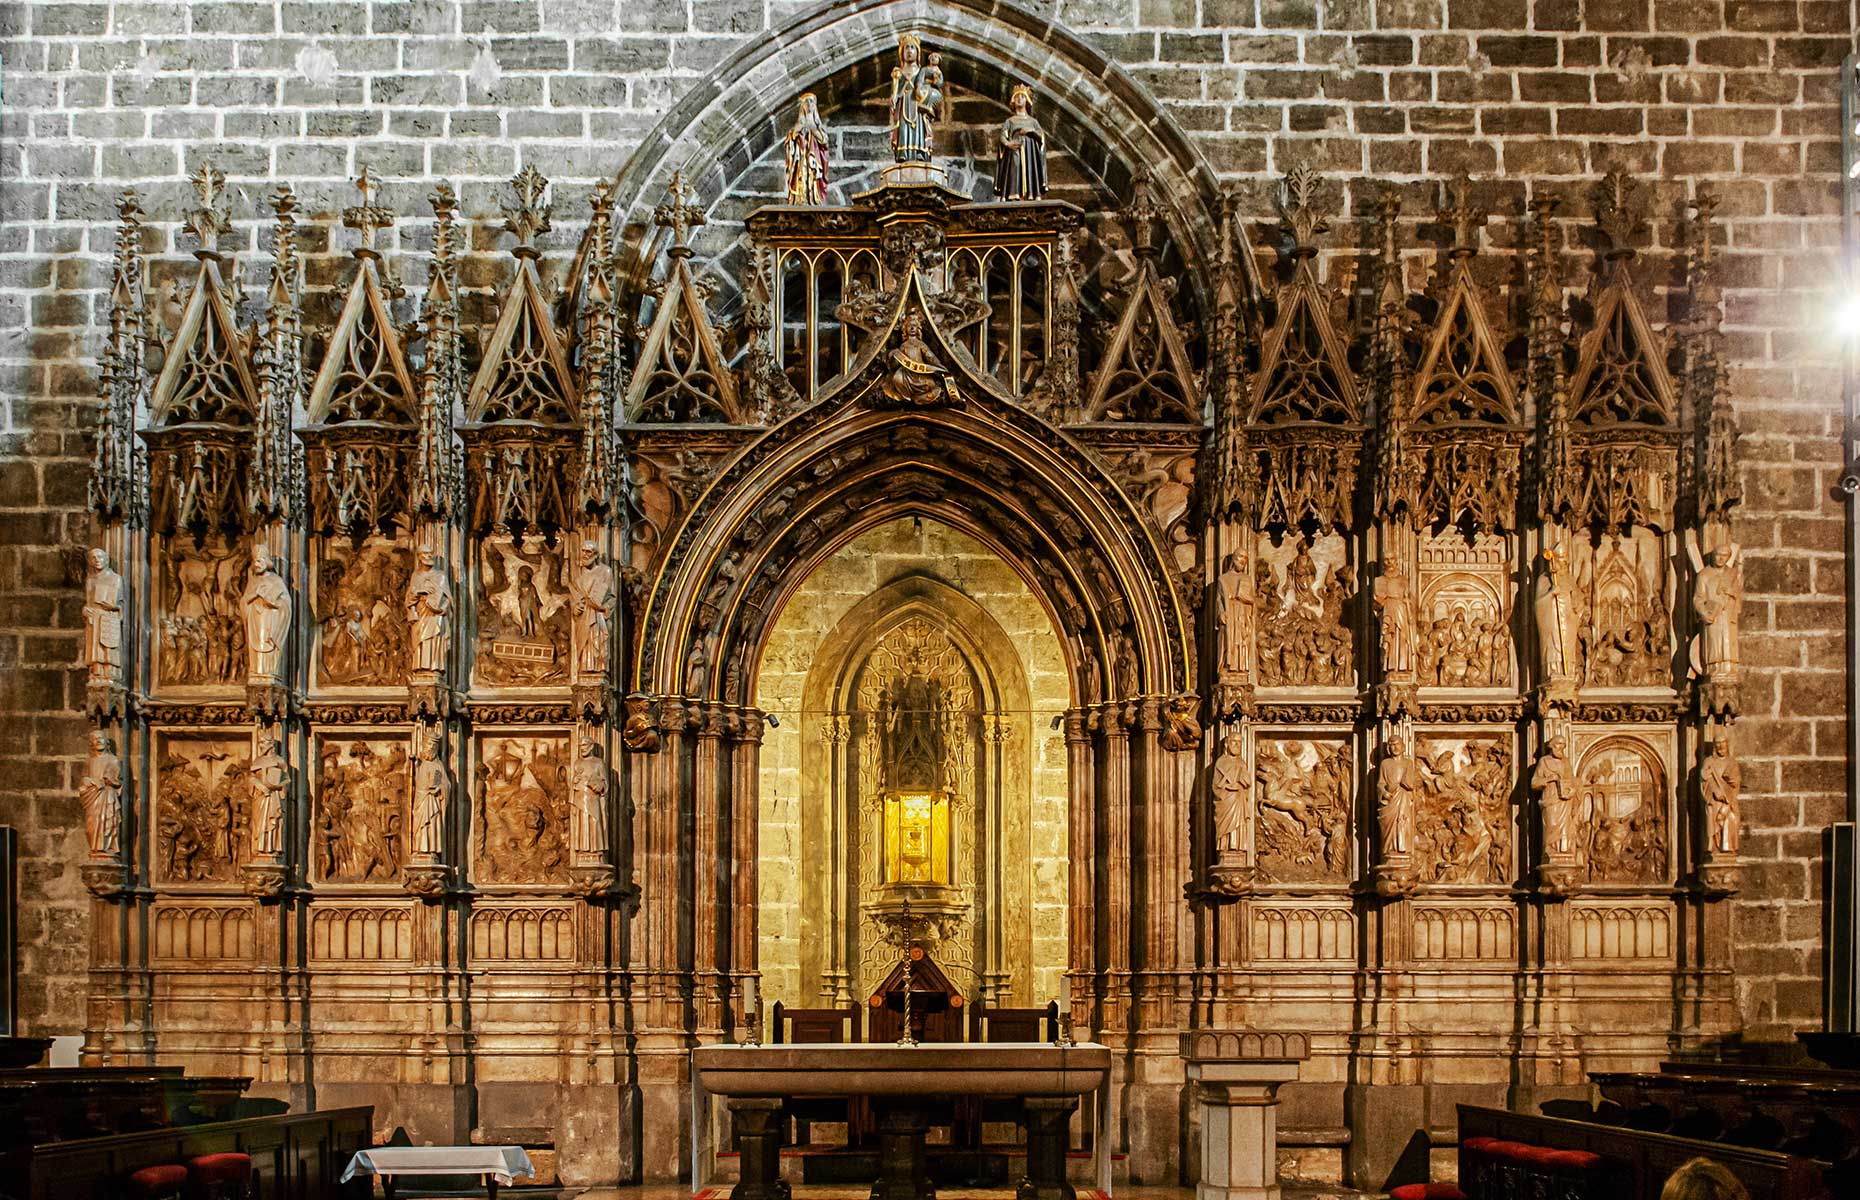 Holy Grail in Valencia Cathedral (Image: PixHound/Shutterstock)